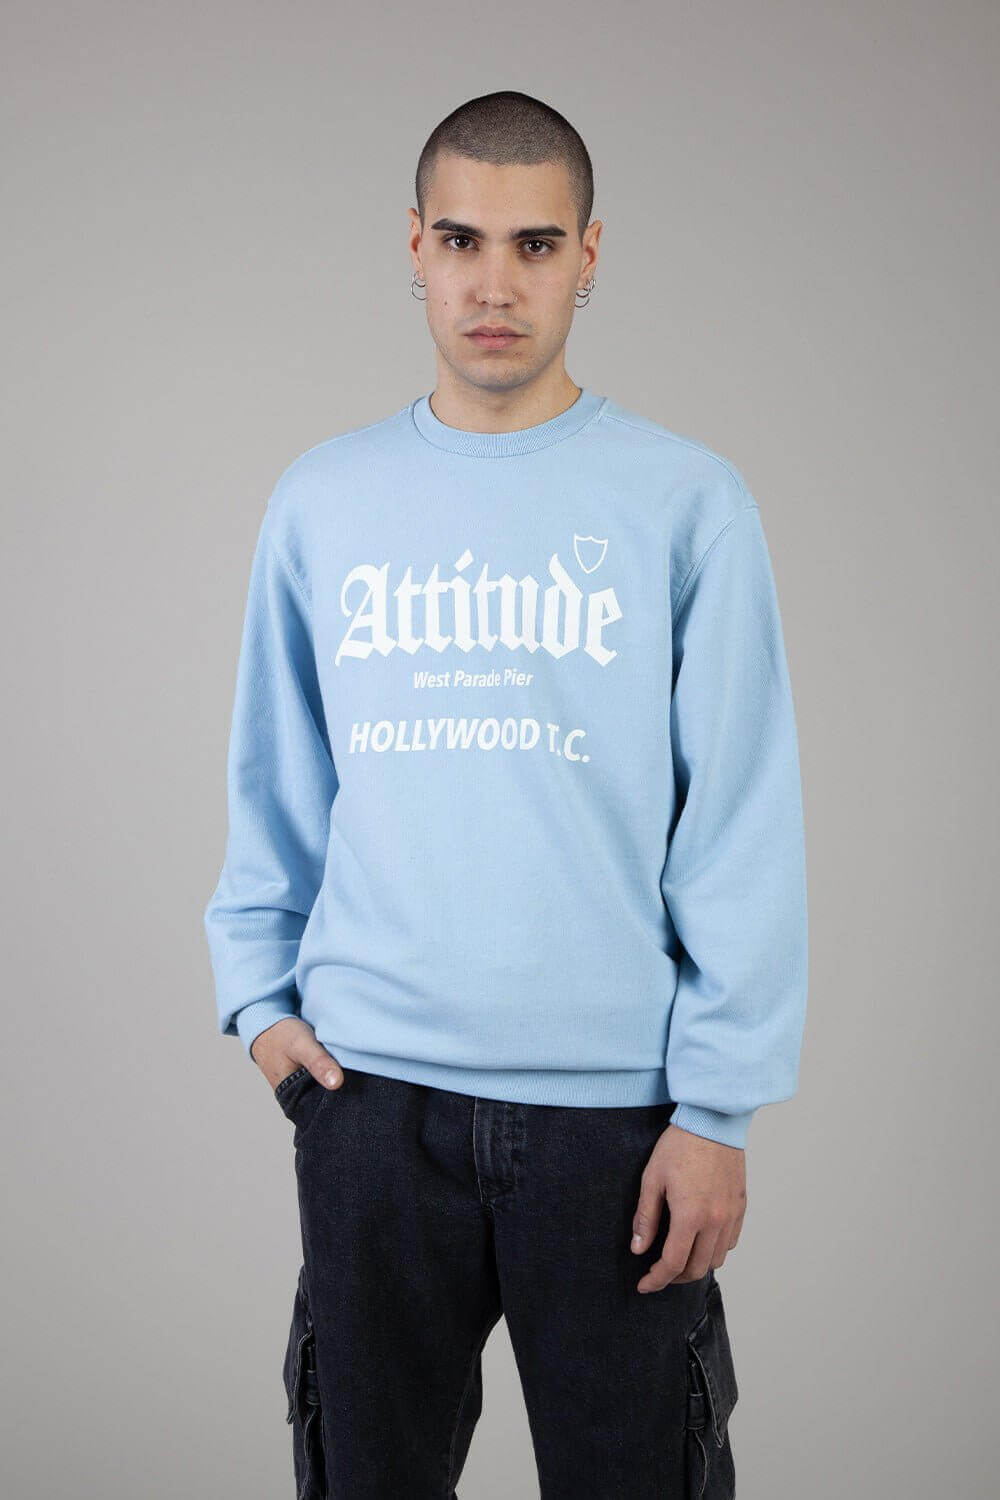 ATTITUDE CREWNECK Regular fit sweater with printed logo on the front. Composition: 100% Cotton HTC LOS ANGELES